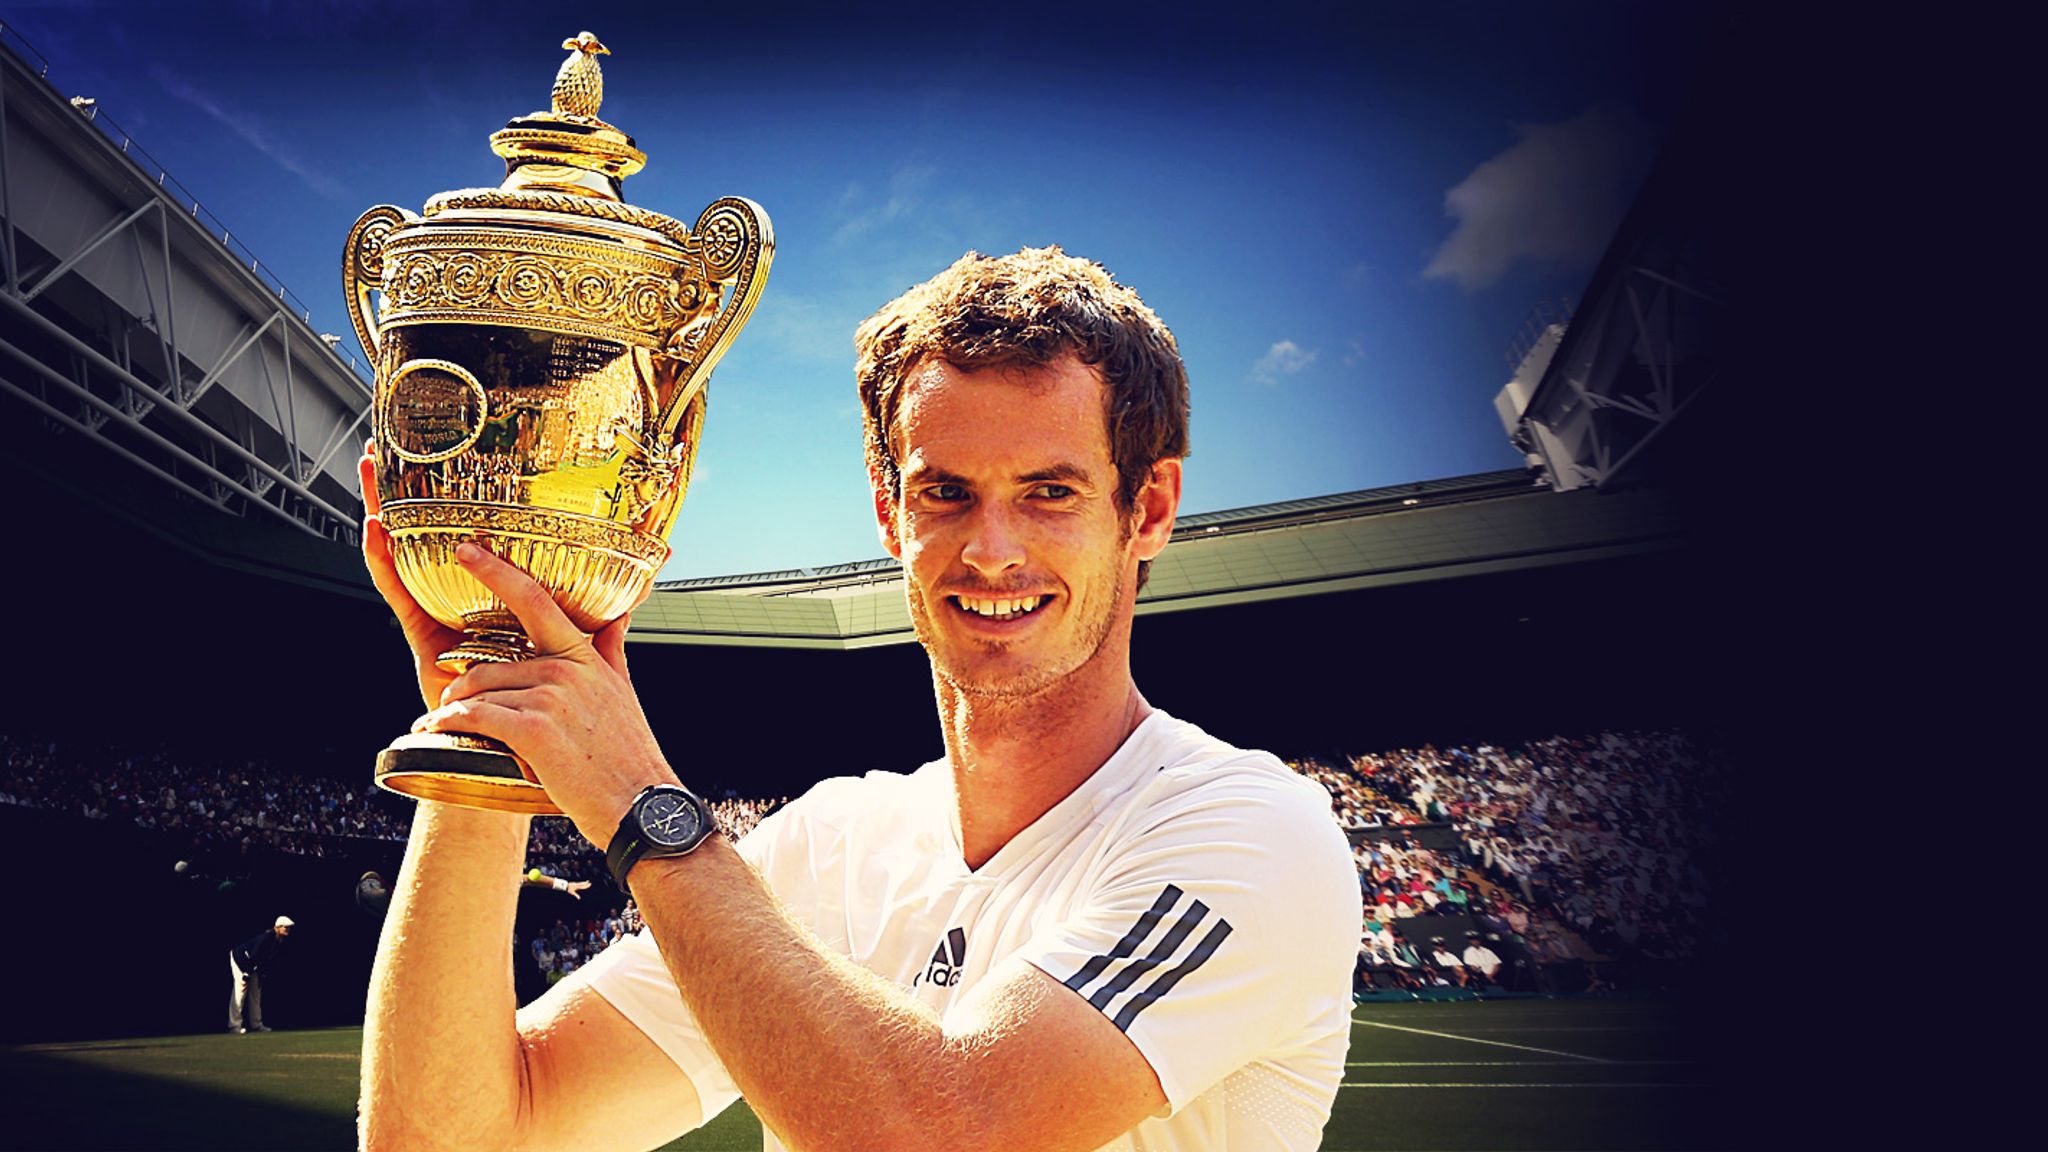 Andy Murray S Road To Becoming A Wimbledon Champion In 2013 Tennis News Sky Sports